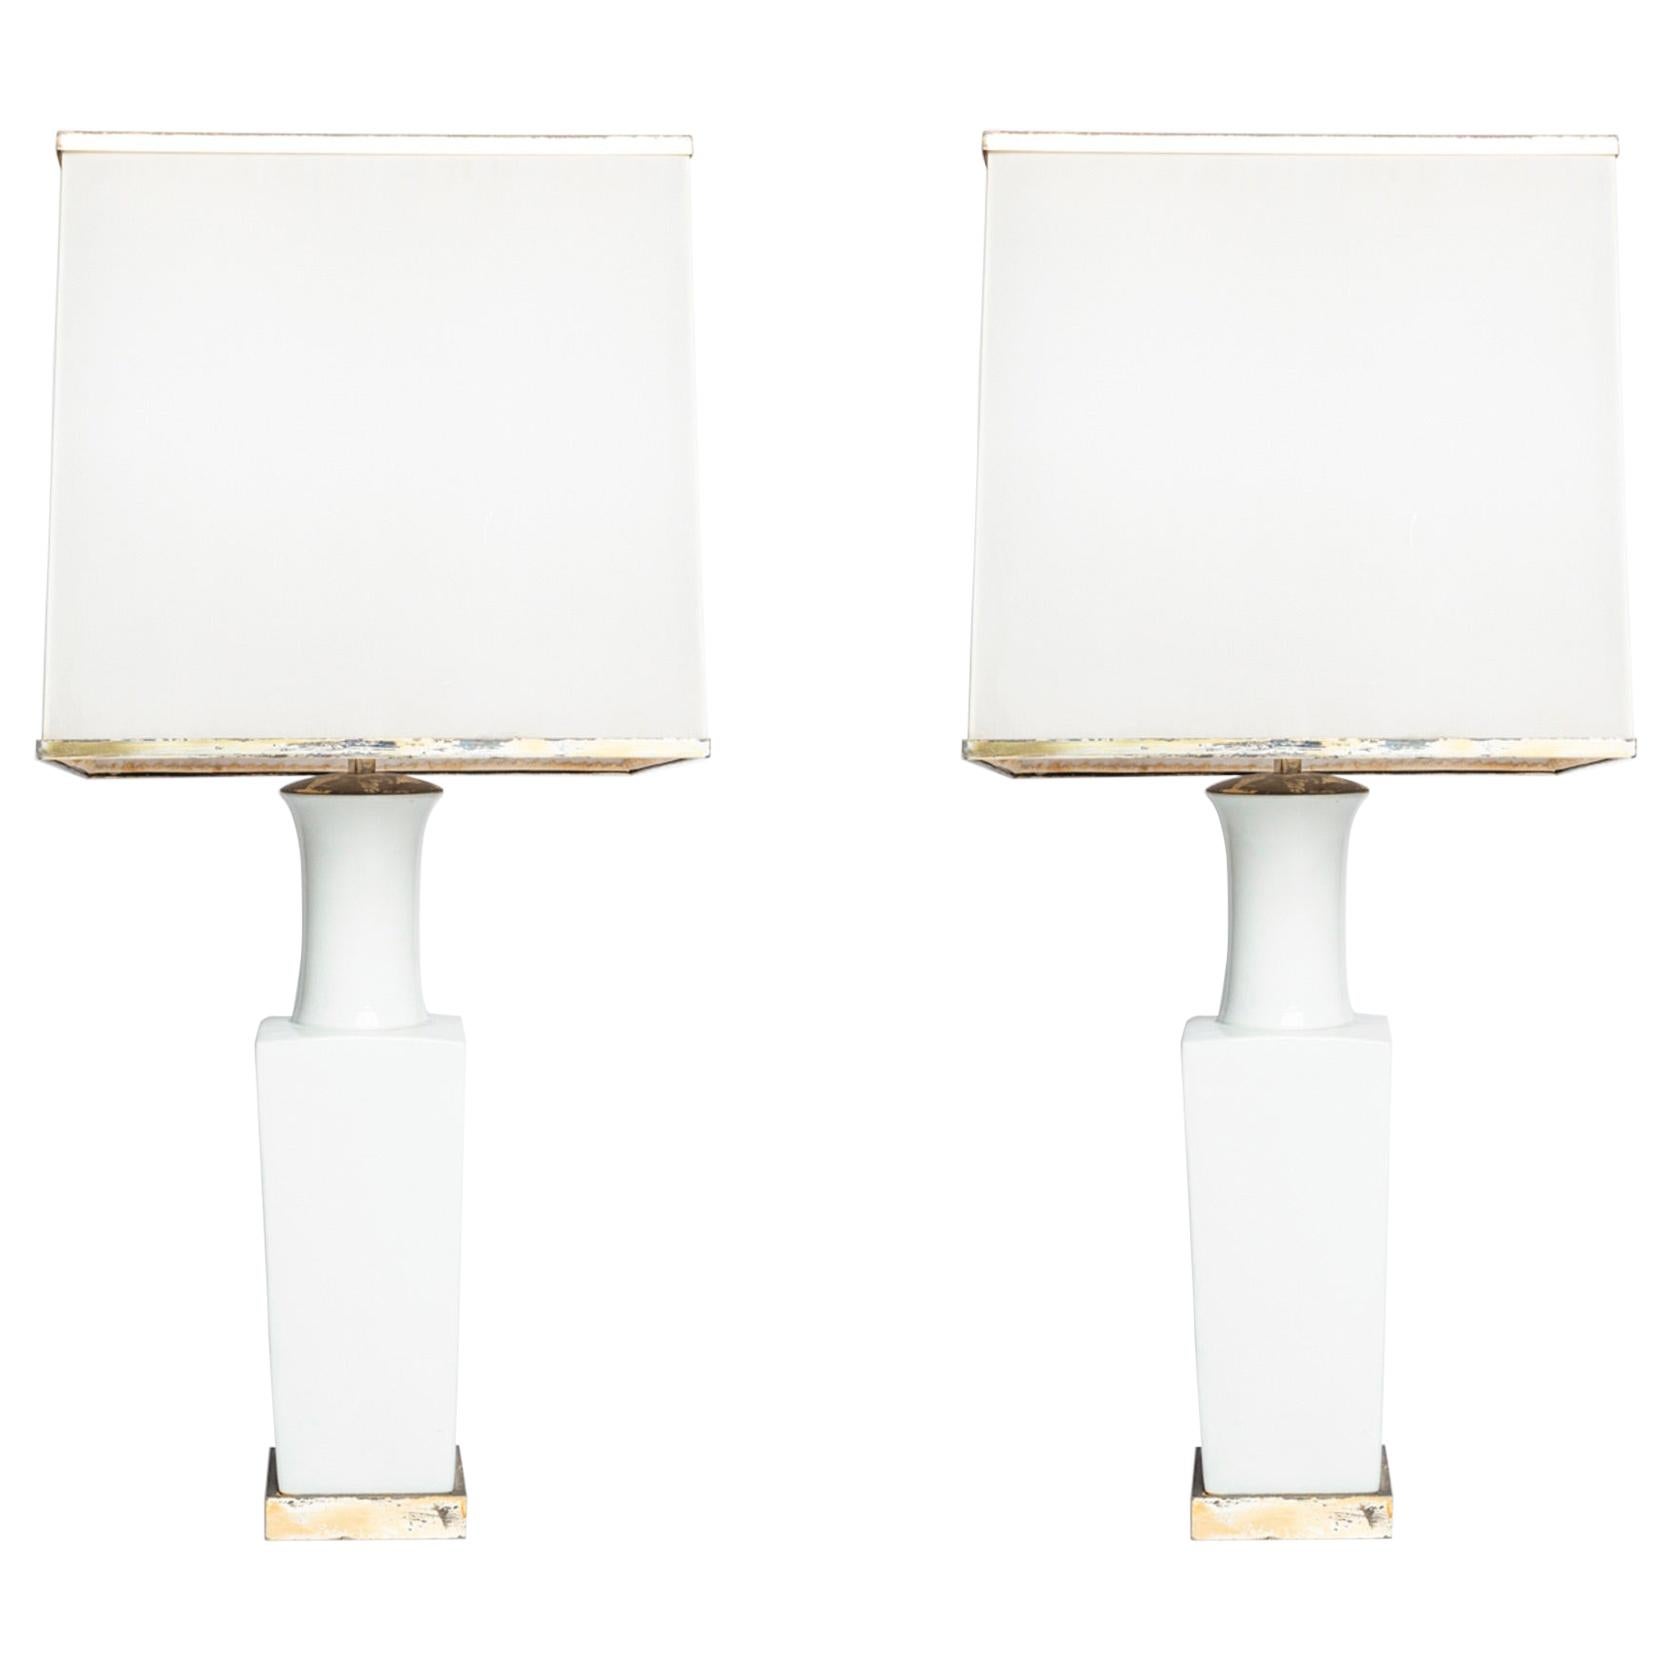 Pair of White Lamps, Italian Manufacture, 1950s